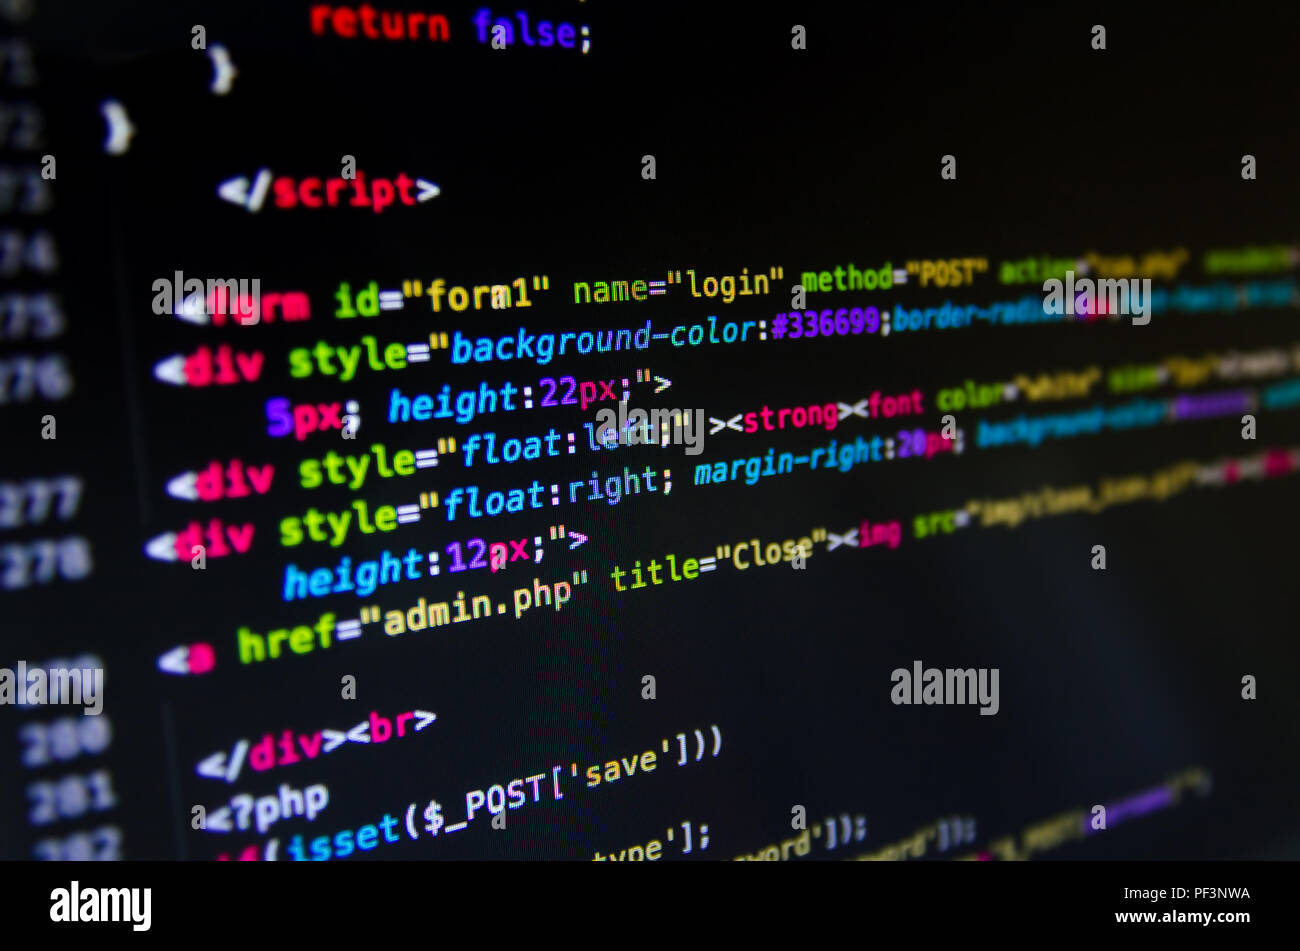 Desktop source code and technology background, Developer or programer with coding and programming, Wallpaper by Computer language and source code, Com Stock Photo